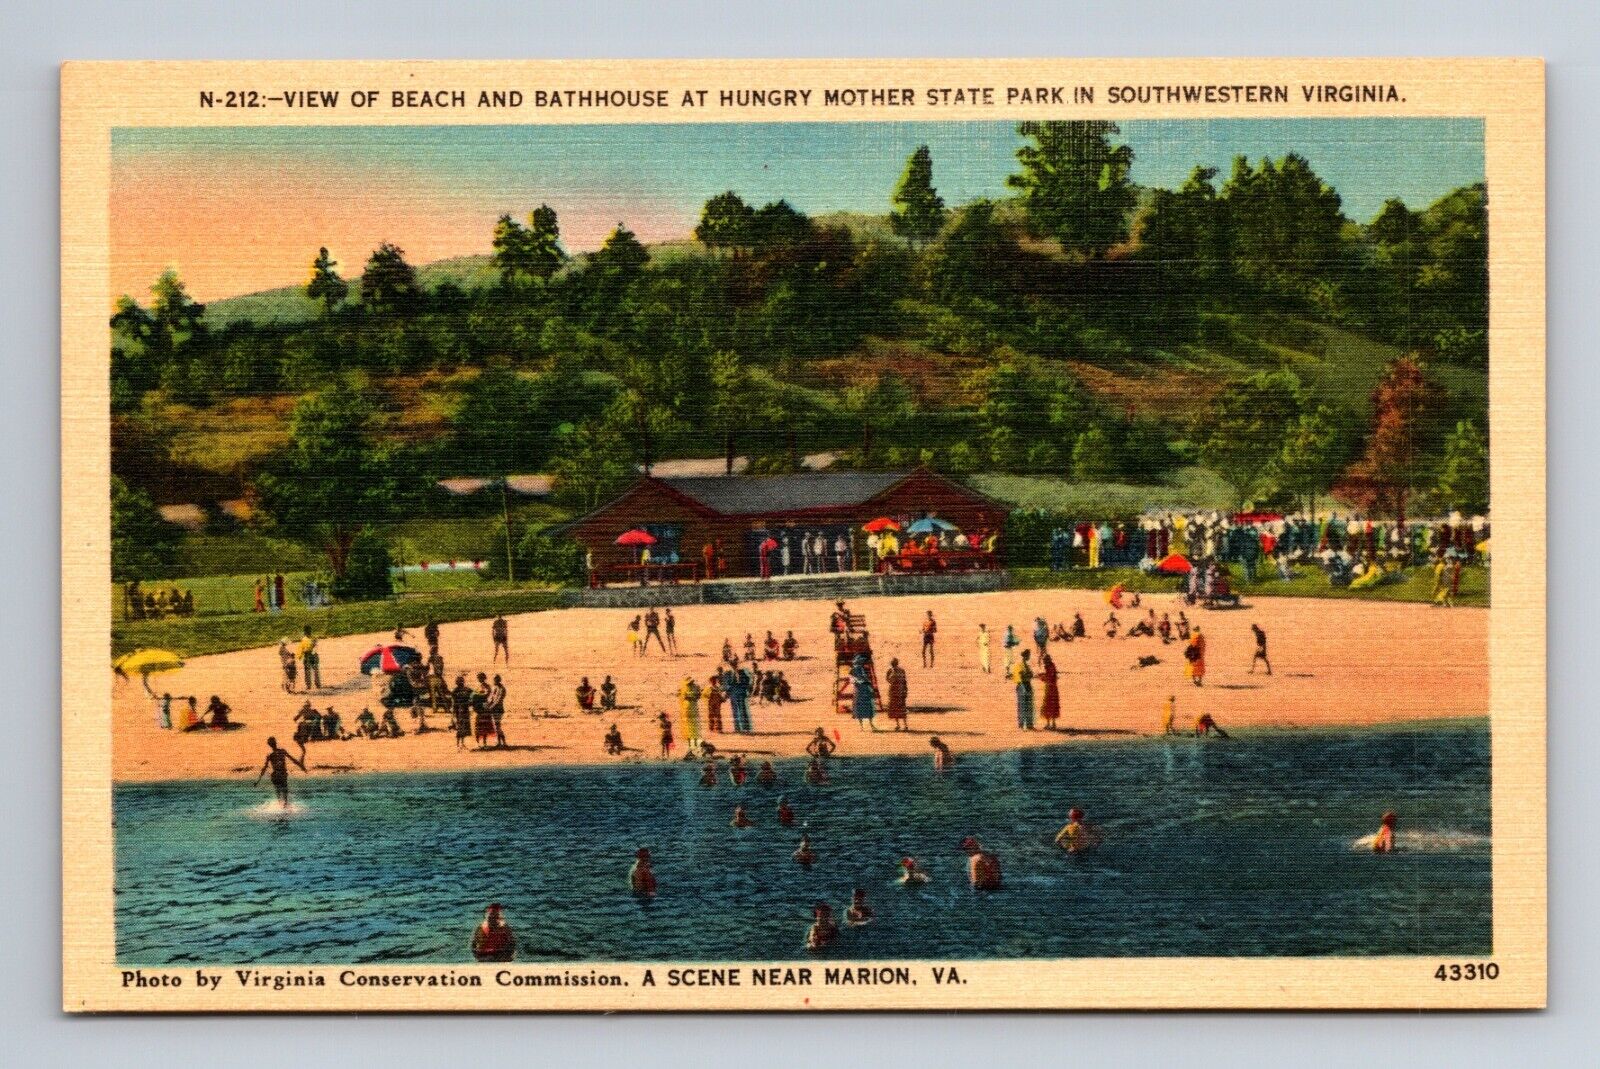 Hungry Mother State Park Bathhouse and Beach Southwestern Virginia Postcard